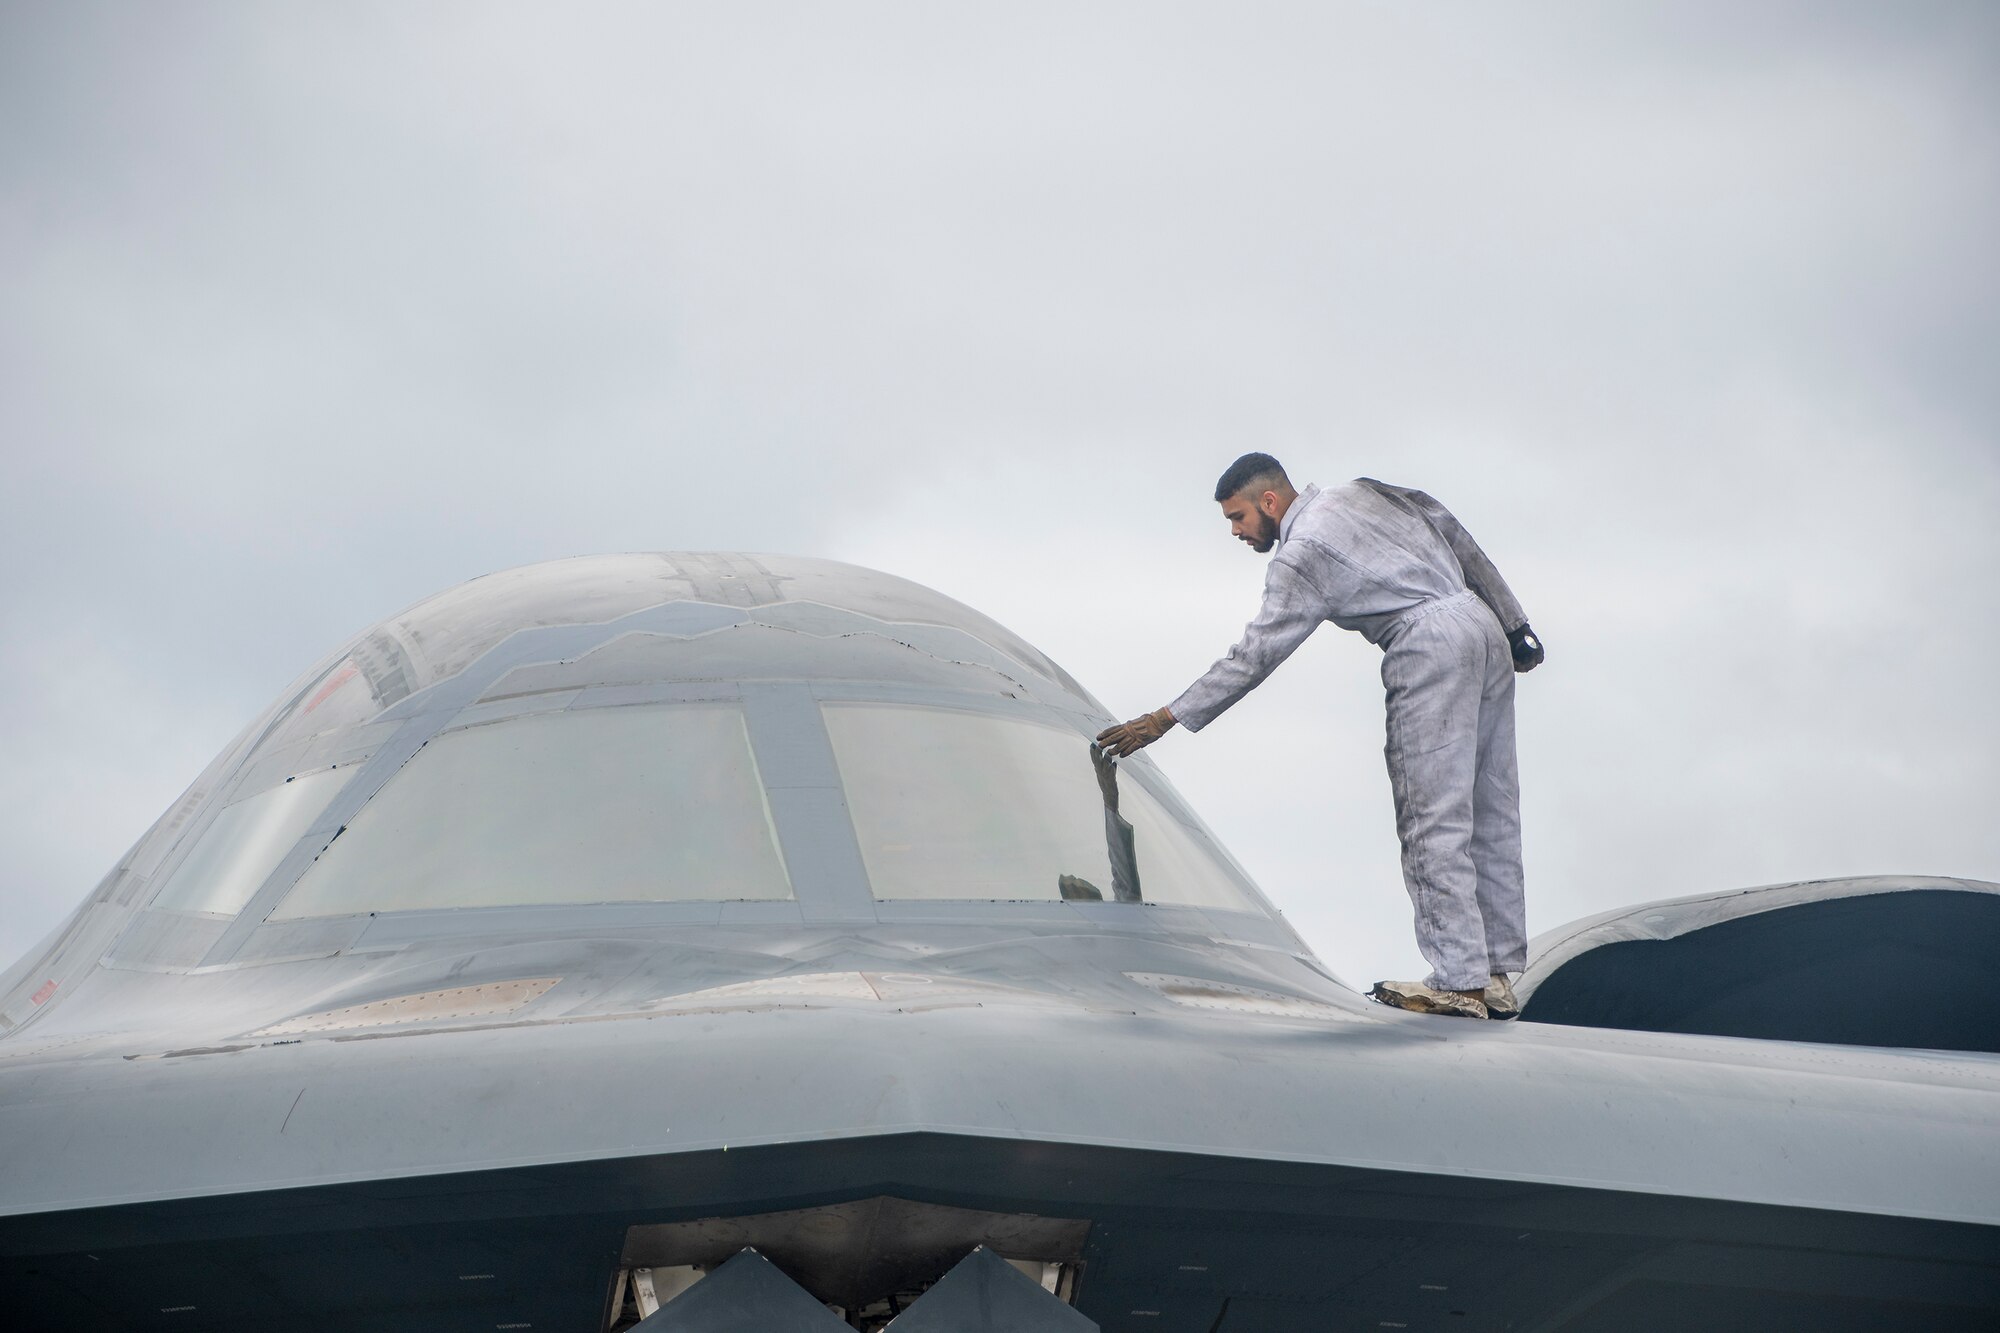 Airmen assigned to the 131st and 509th Maintenance Squadrons conduct post-flight maintenance on a B-2 Spirit stealth bomber at Keflavik Air Base, Iceland, August 26, 2021. The stealth bombers integrated with Royal Air Force Typhoon fighter jets in support of a Bomber Task Force mission to enhance interoperability and and capabilities with NATO allies and partners across the European theater. (U.S. Air National Guard photo by Master Sgt. John E. Hillier)